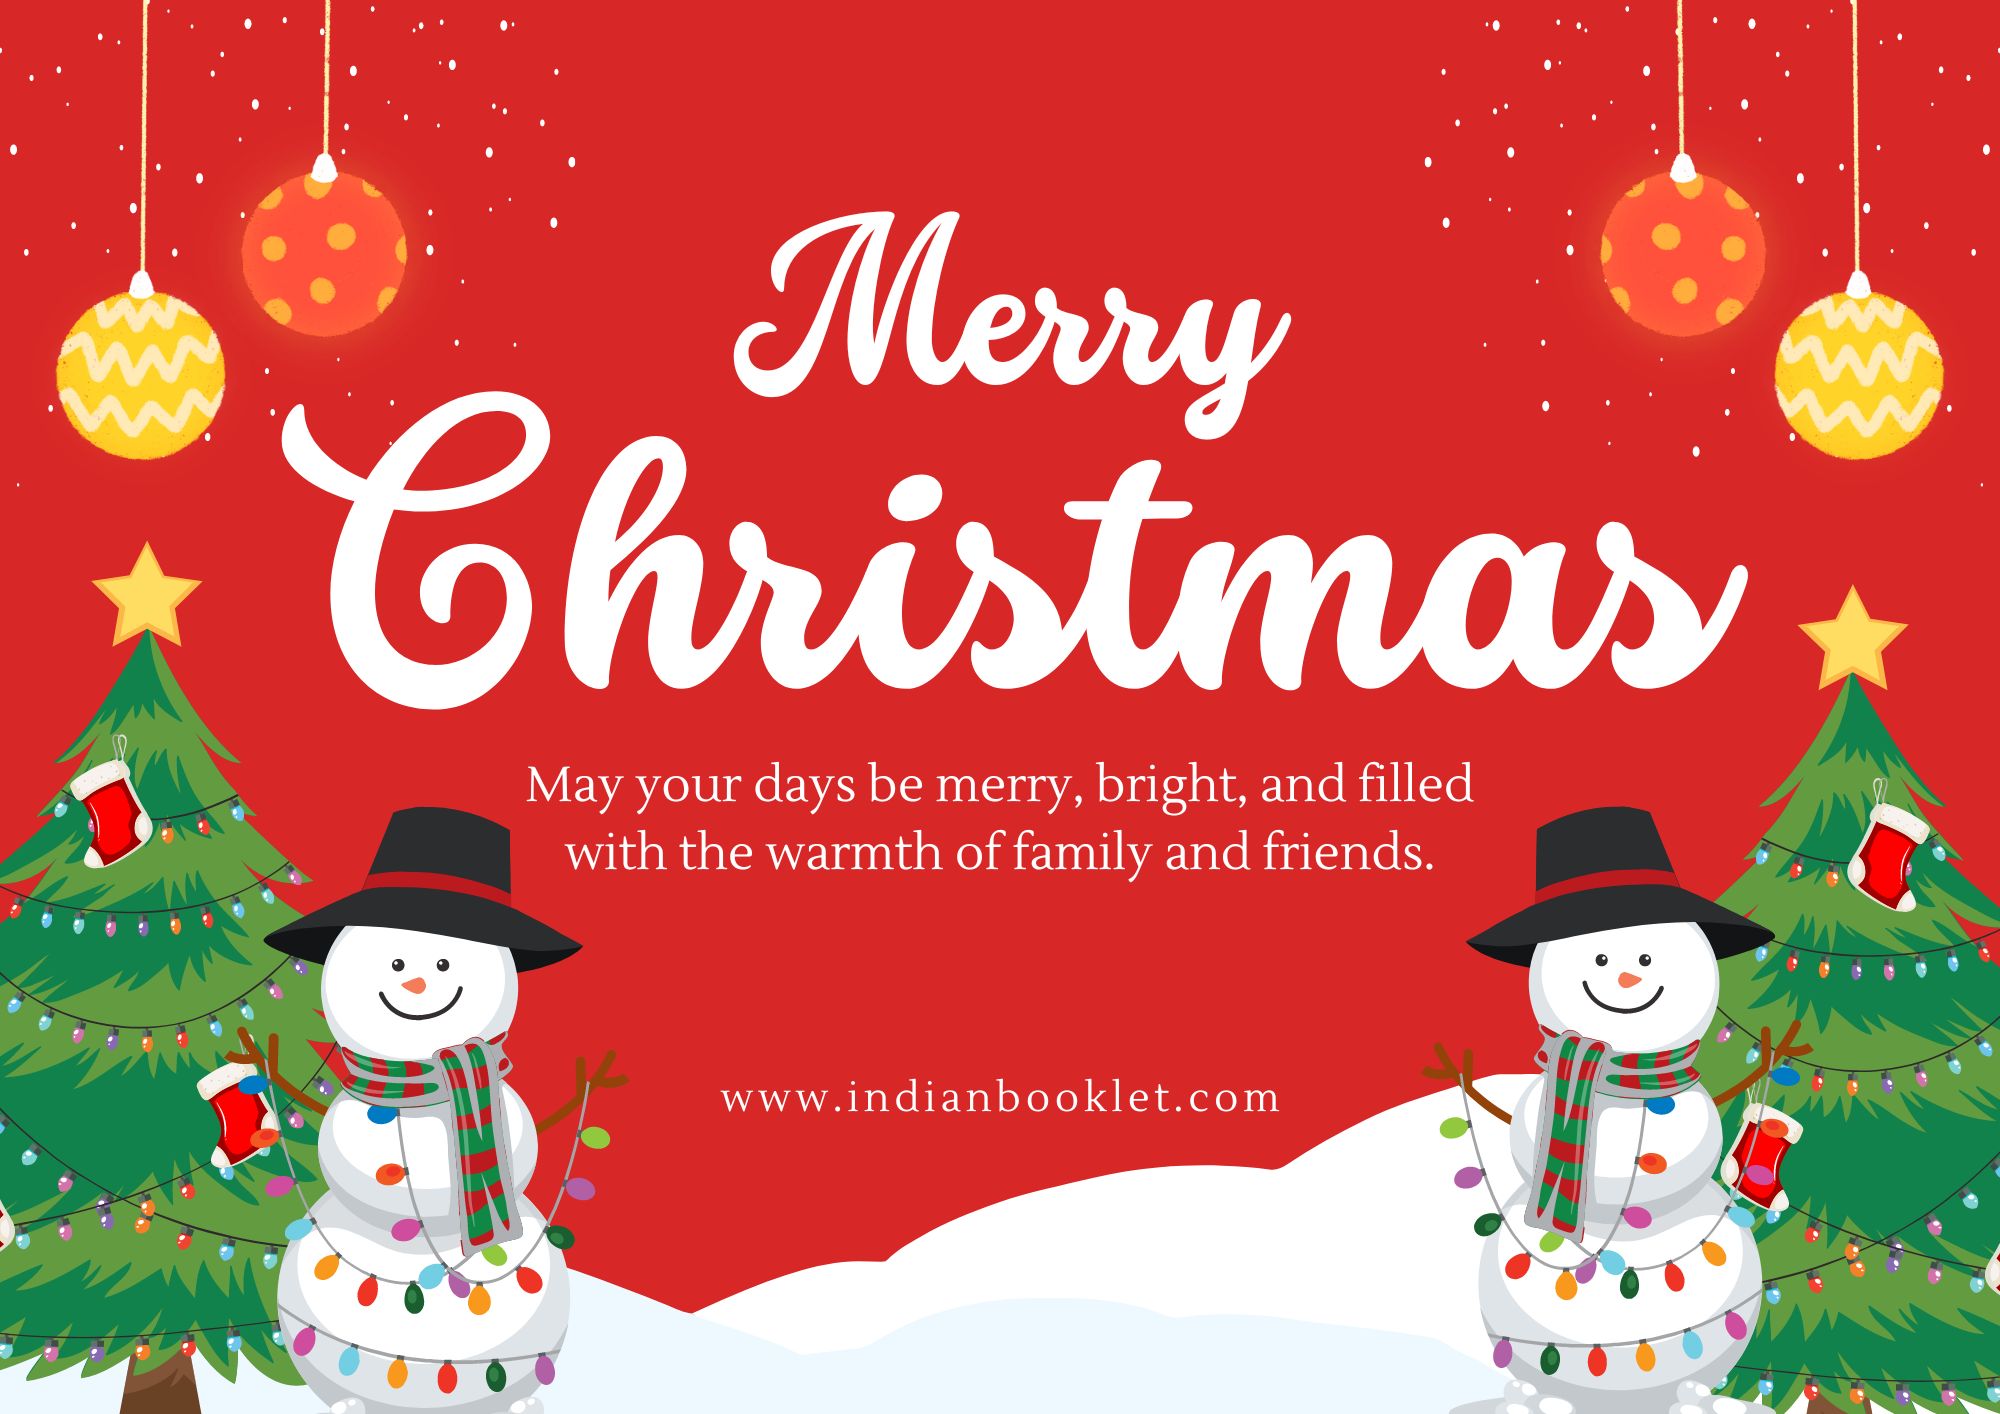 Festive  Merry Christmas Images, Download Free Christmas Wishes Images for a Joyful Celebration